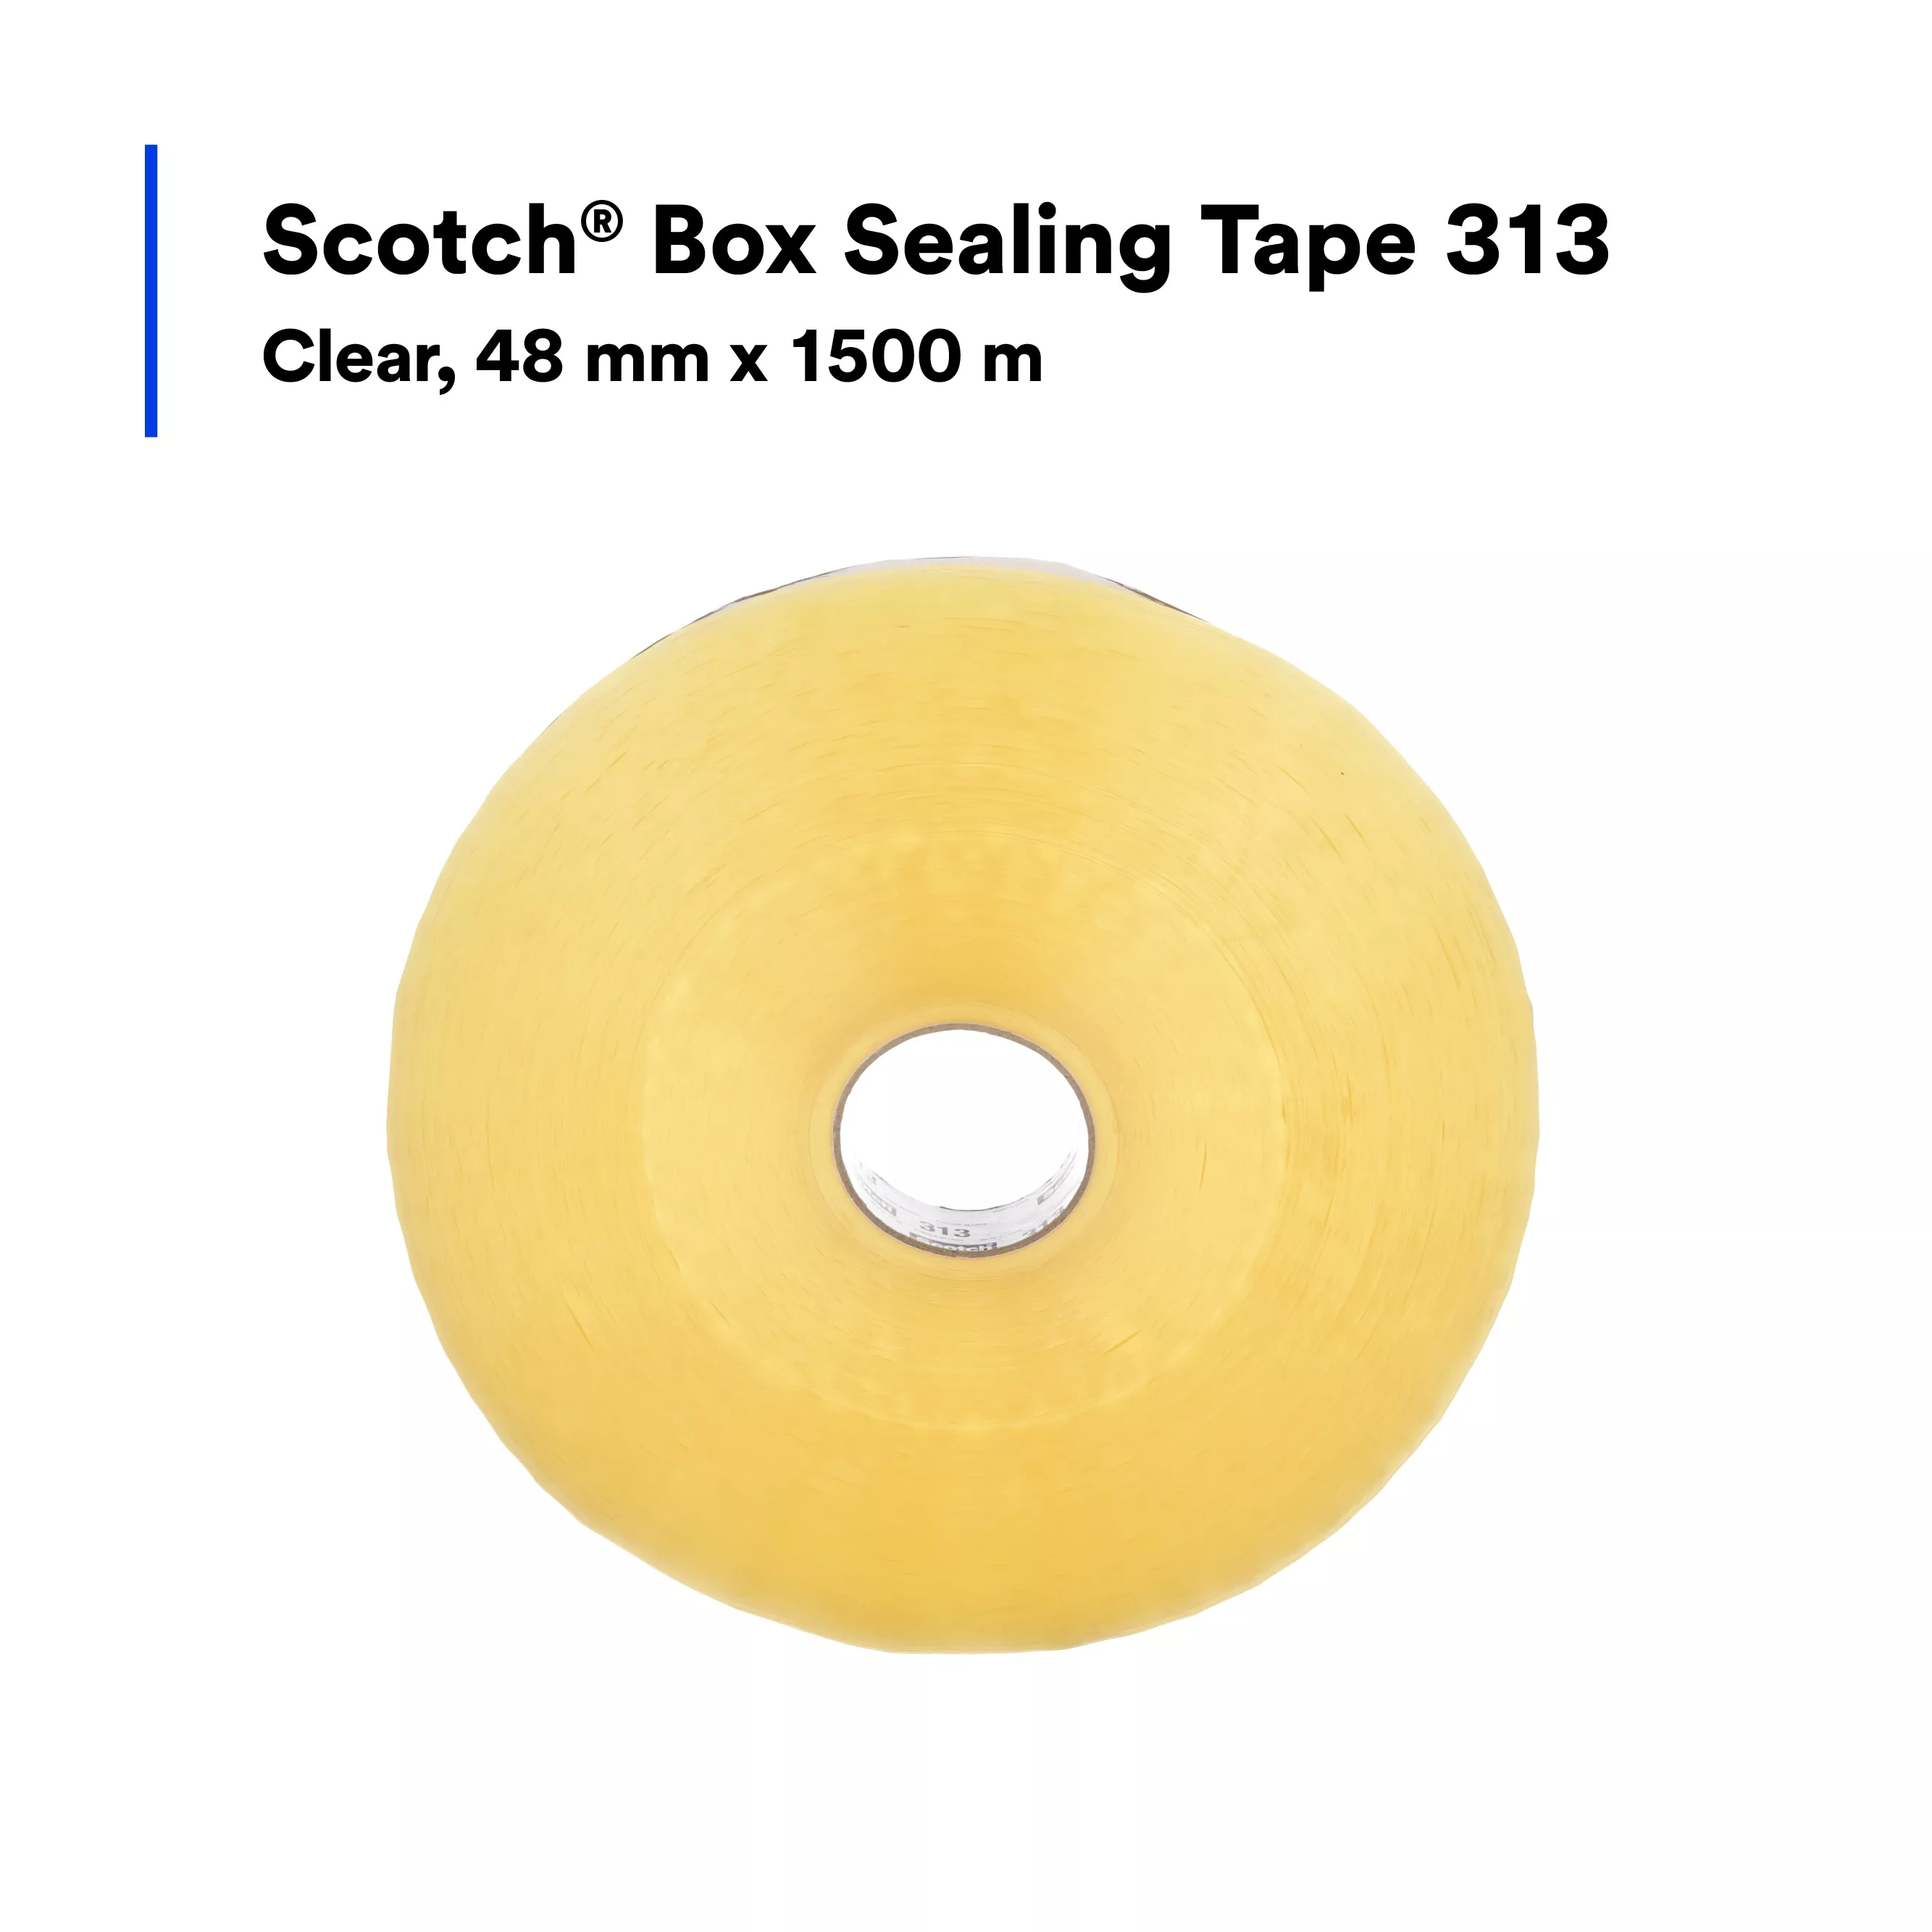 Product Number 313 | Scotch® Box Sealing Tape 313